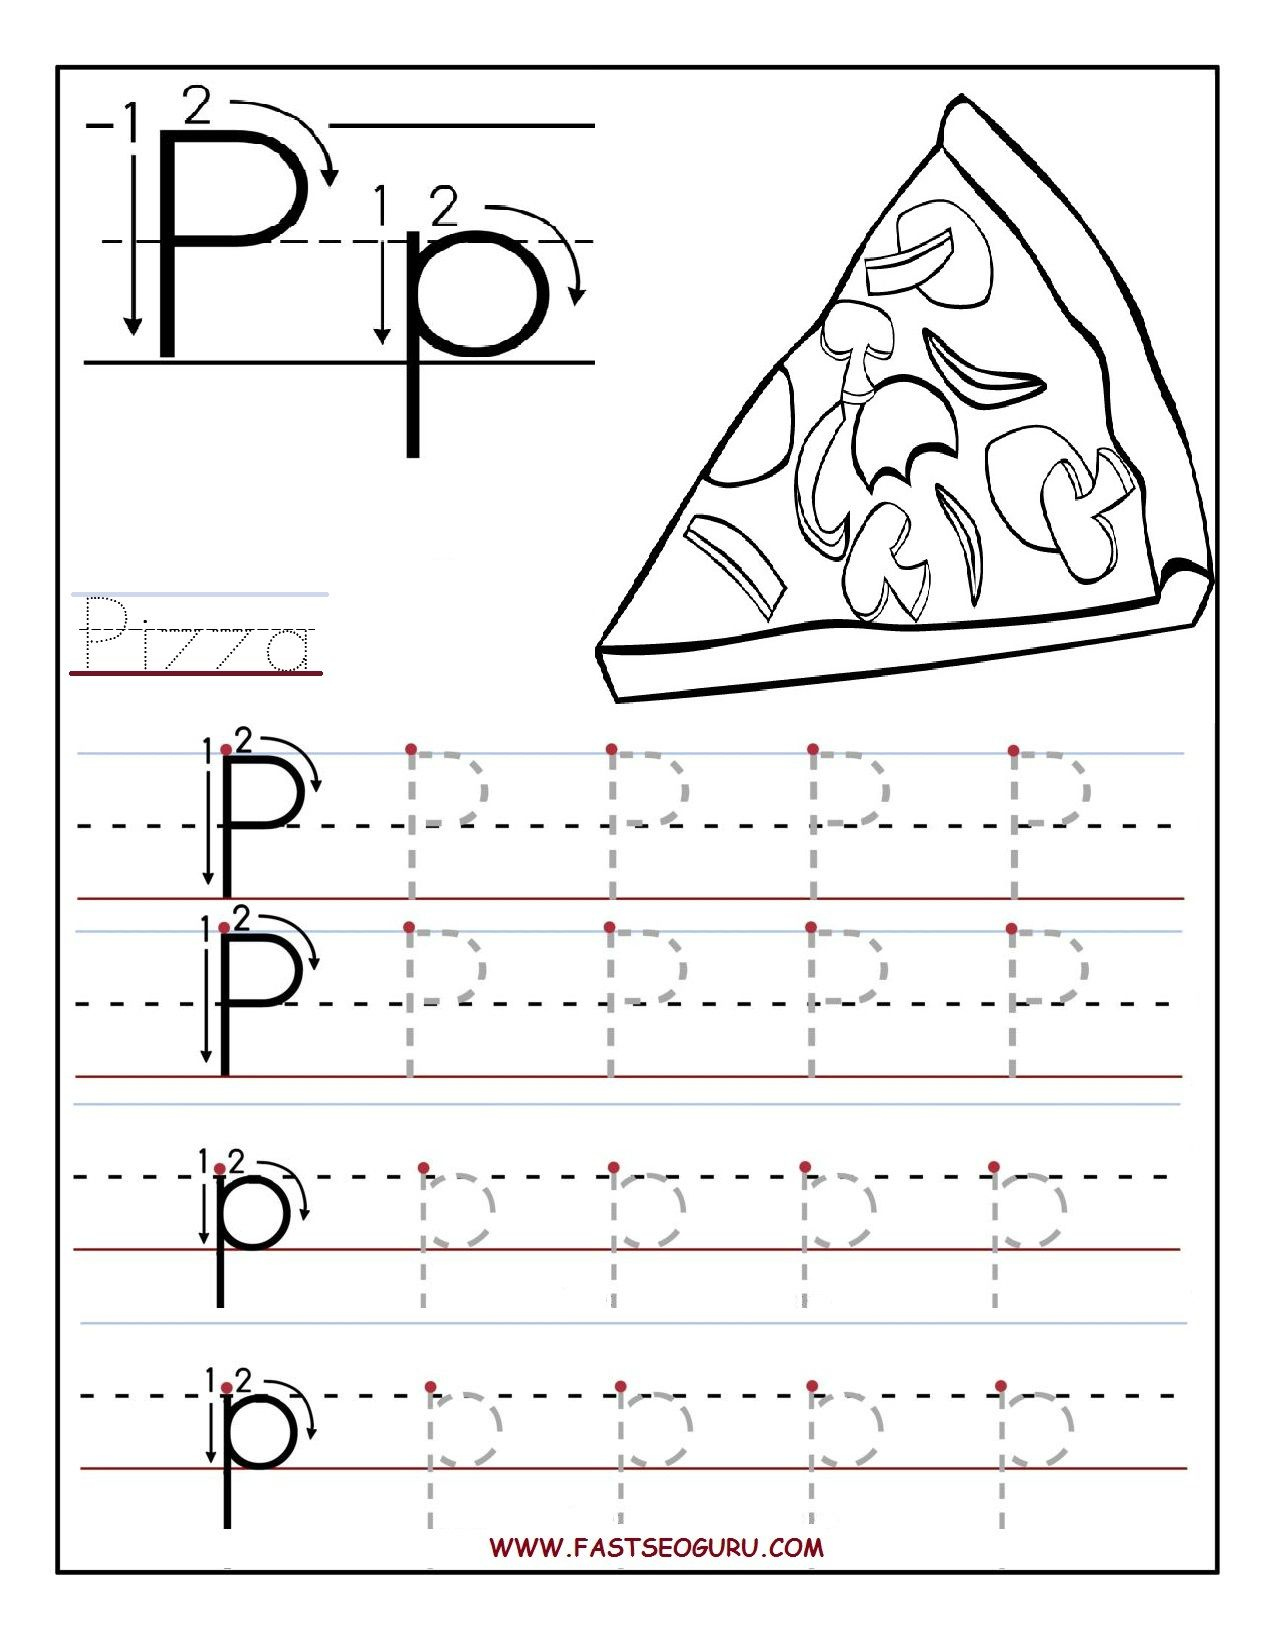 Printable Letter P Tracing Worksheets For Preschool Tracing 